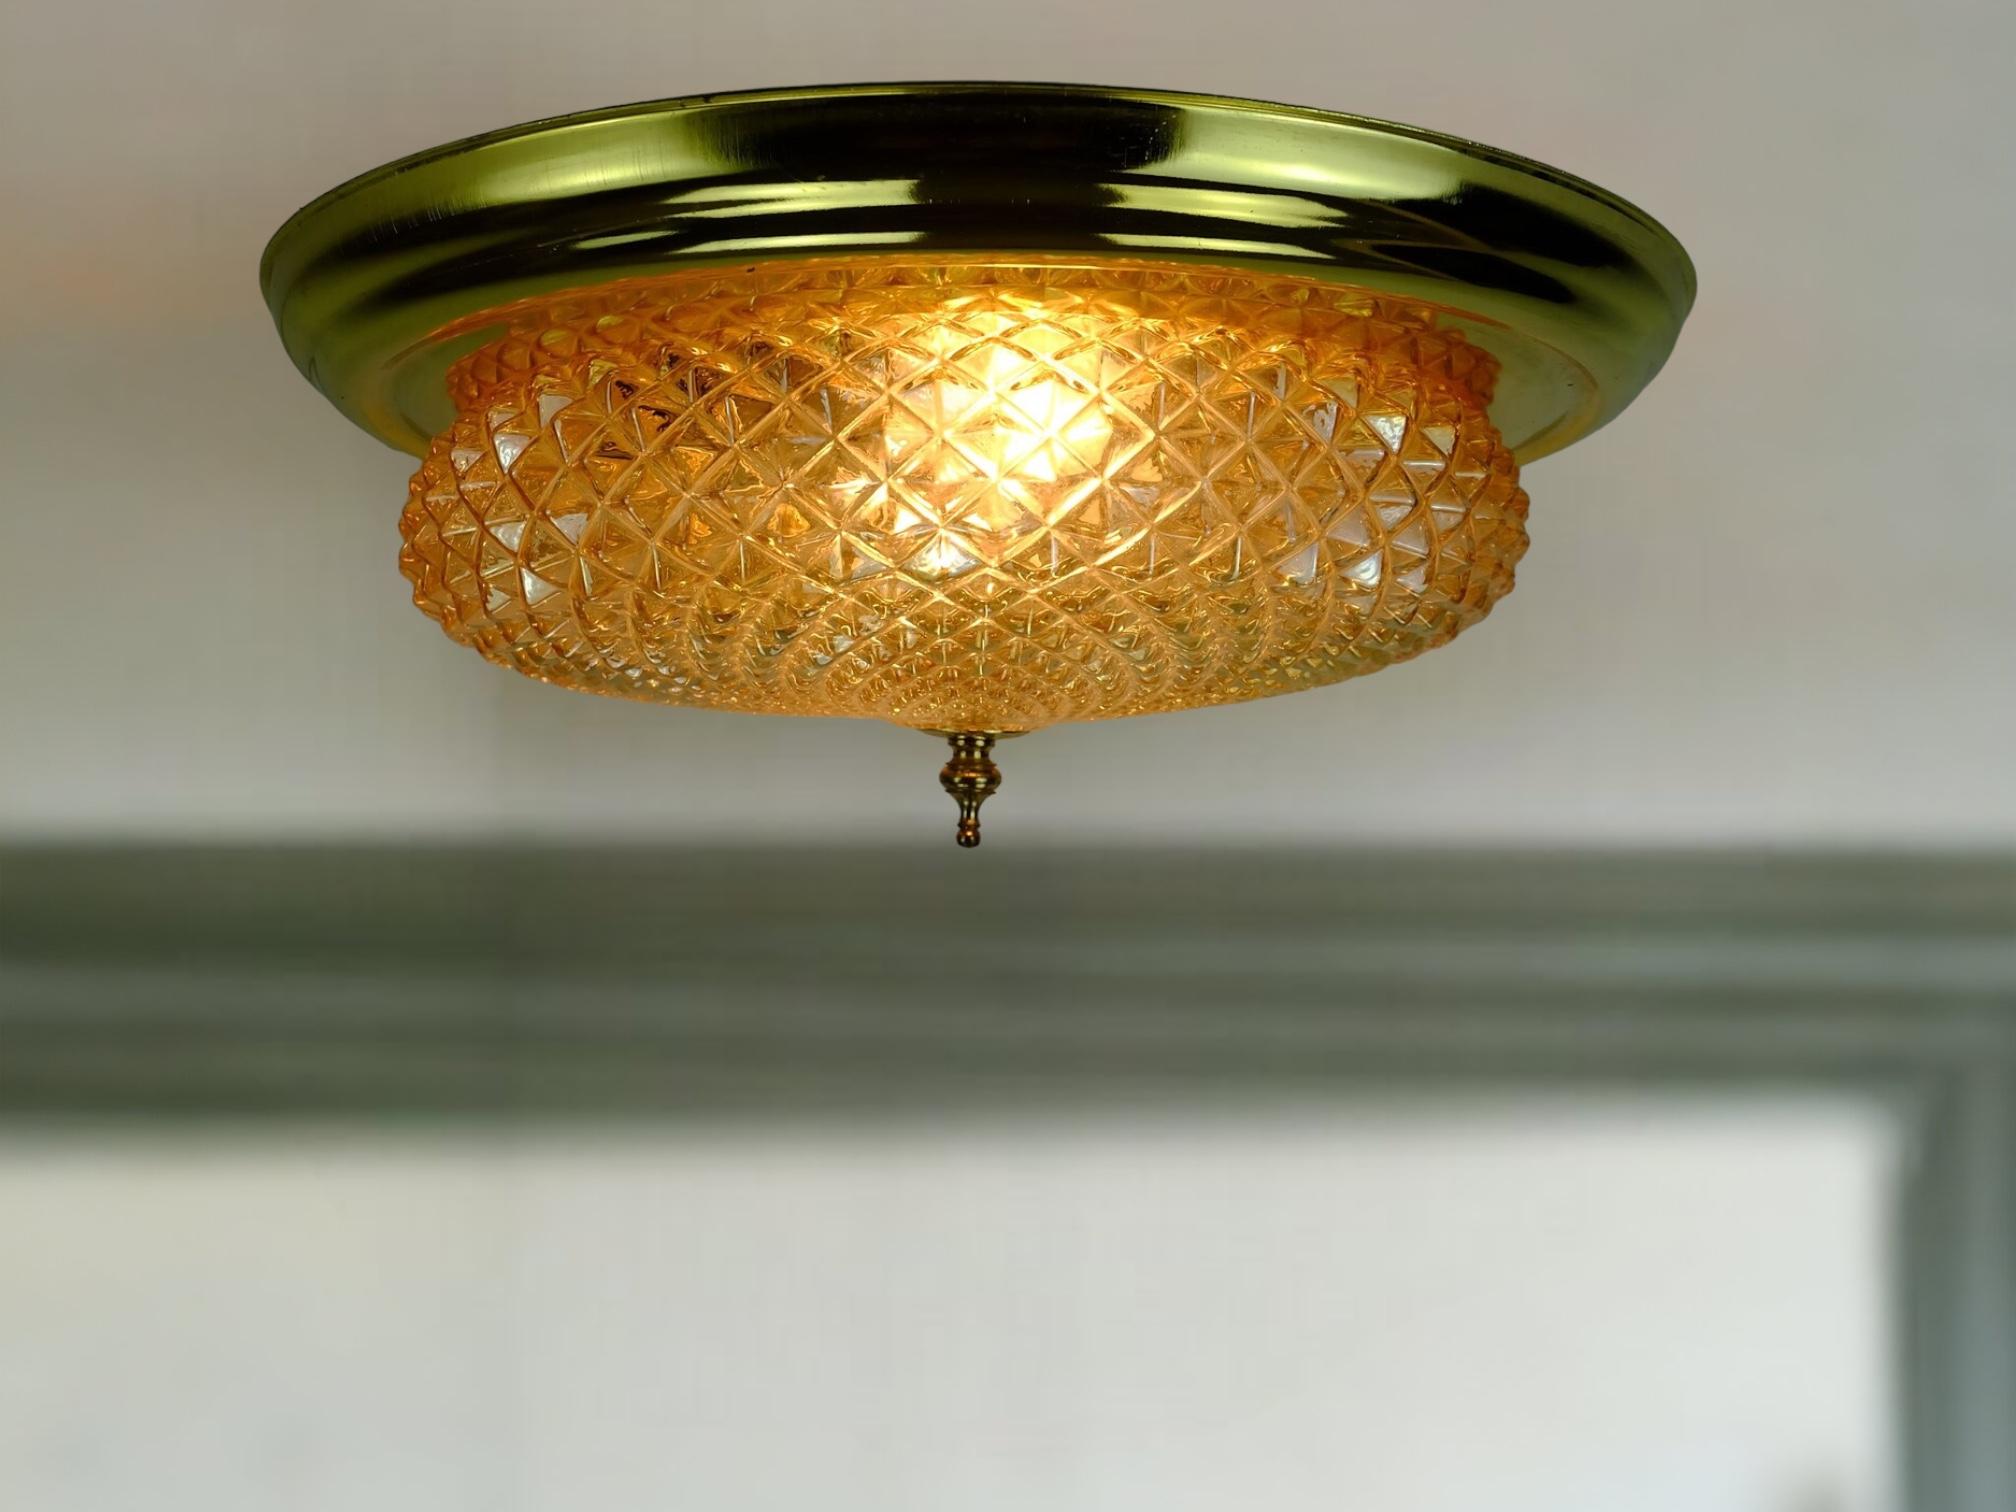 Elegant ceiling lamp made in the 1970s. Without manufacturer identification, probably Glashütte Limburg or Schroeder-Leuchten. The base is made of white painted metal, the frame is made of brass. The shade is made of glass with a light amber tone